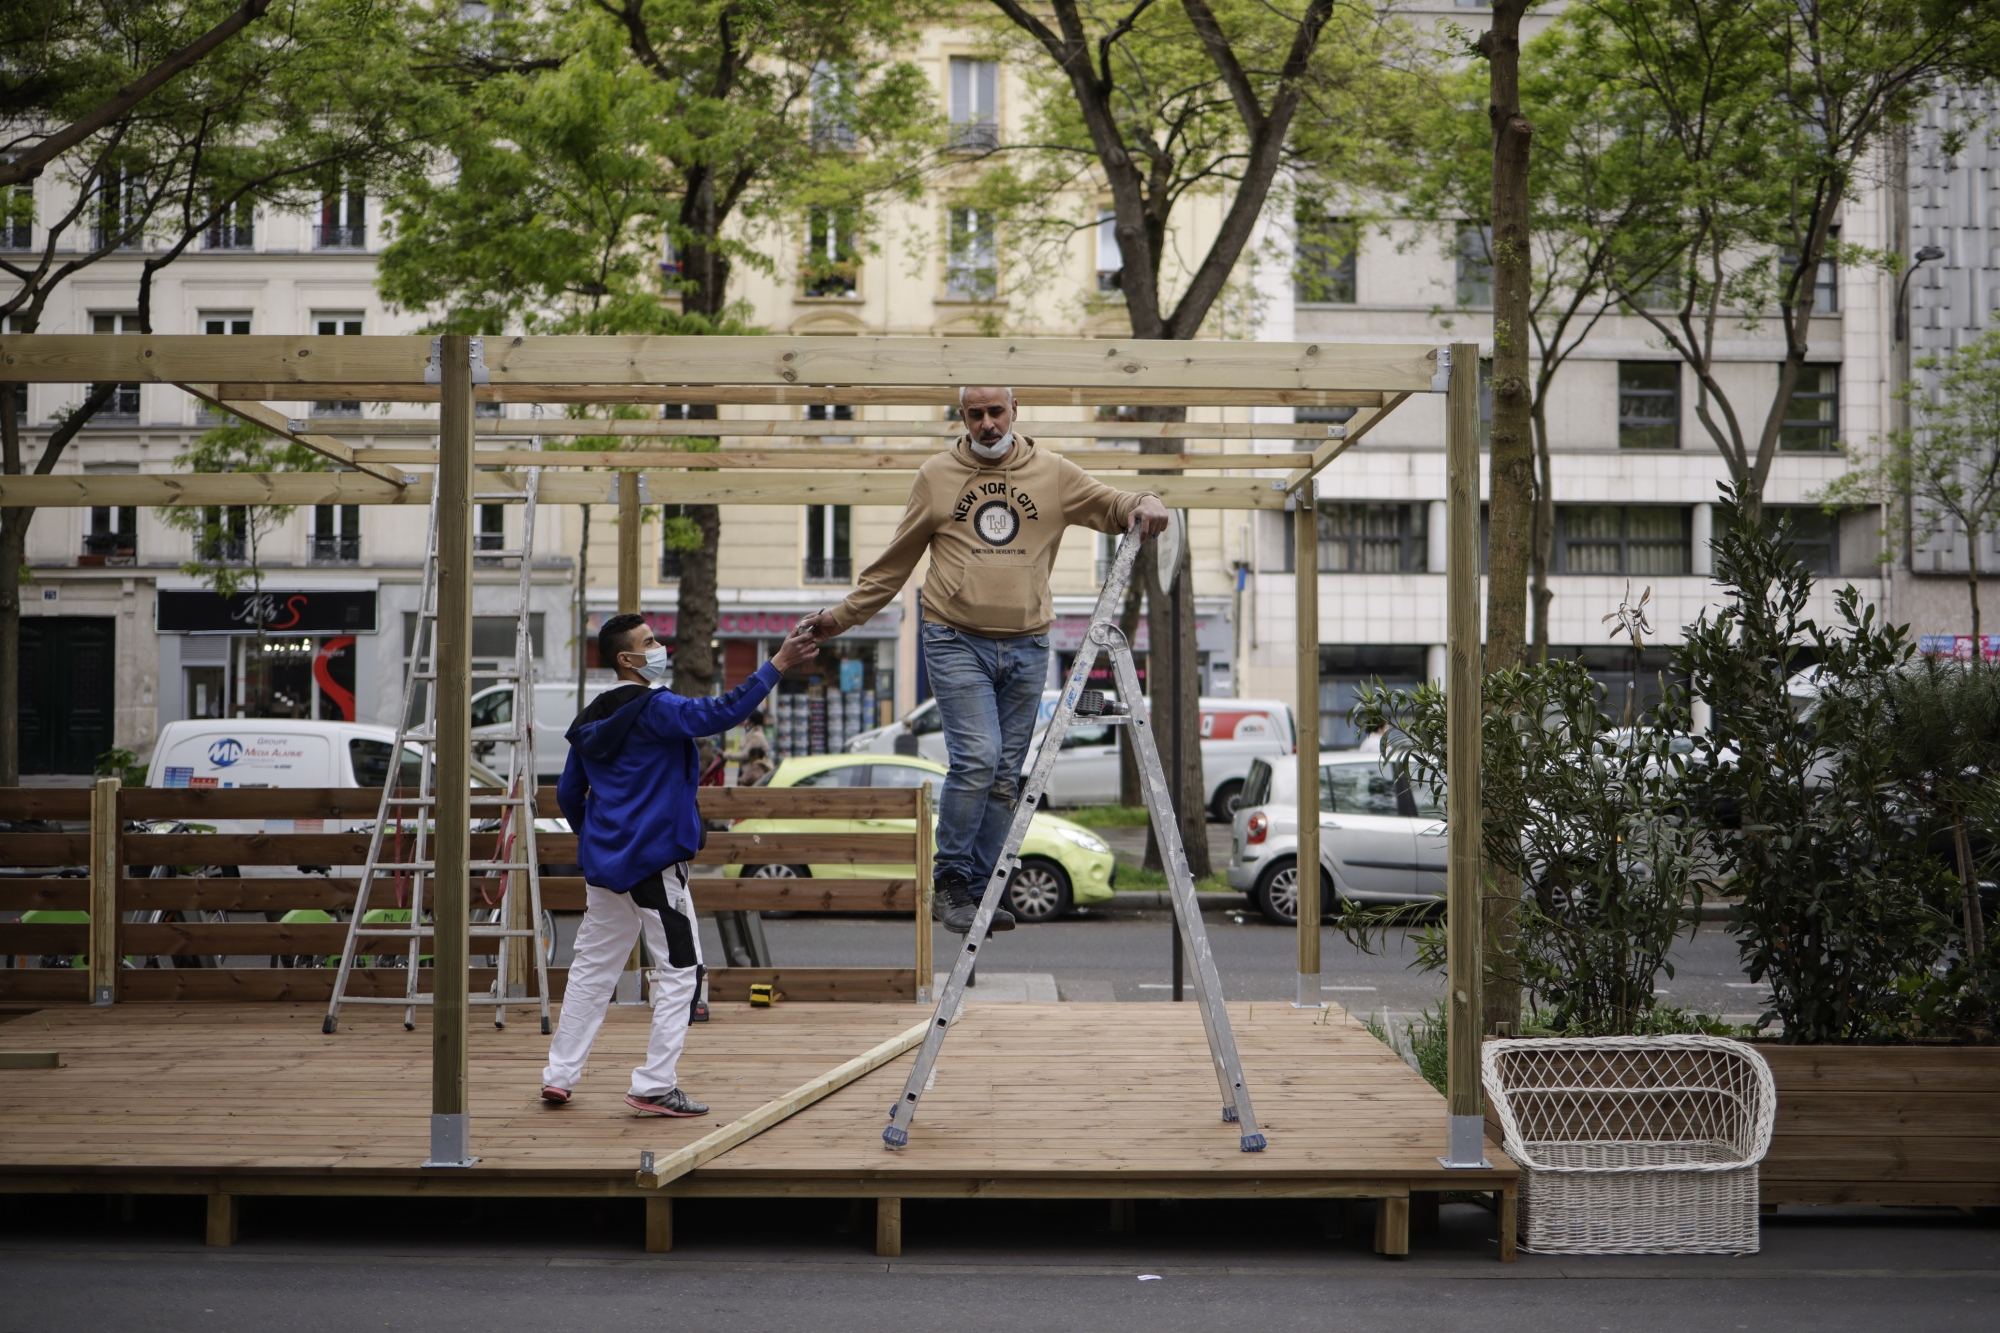 epa09208593 Construction workers build a bar wooden terrace on the eve of its reopening in Paris, France, 18 May 2021. France will ease some of its coronavirus disease (COVID-19) restrictions starting on 19 May, allowing shops, cultural sites, restaurants and cafes admitting customers outdoors, as pressure on hospitals and intensive care units in the country is diminishing. EPA/YOAN VALAT